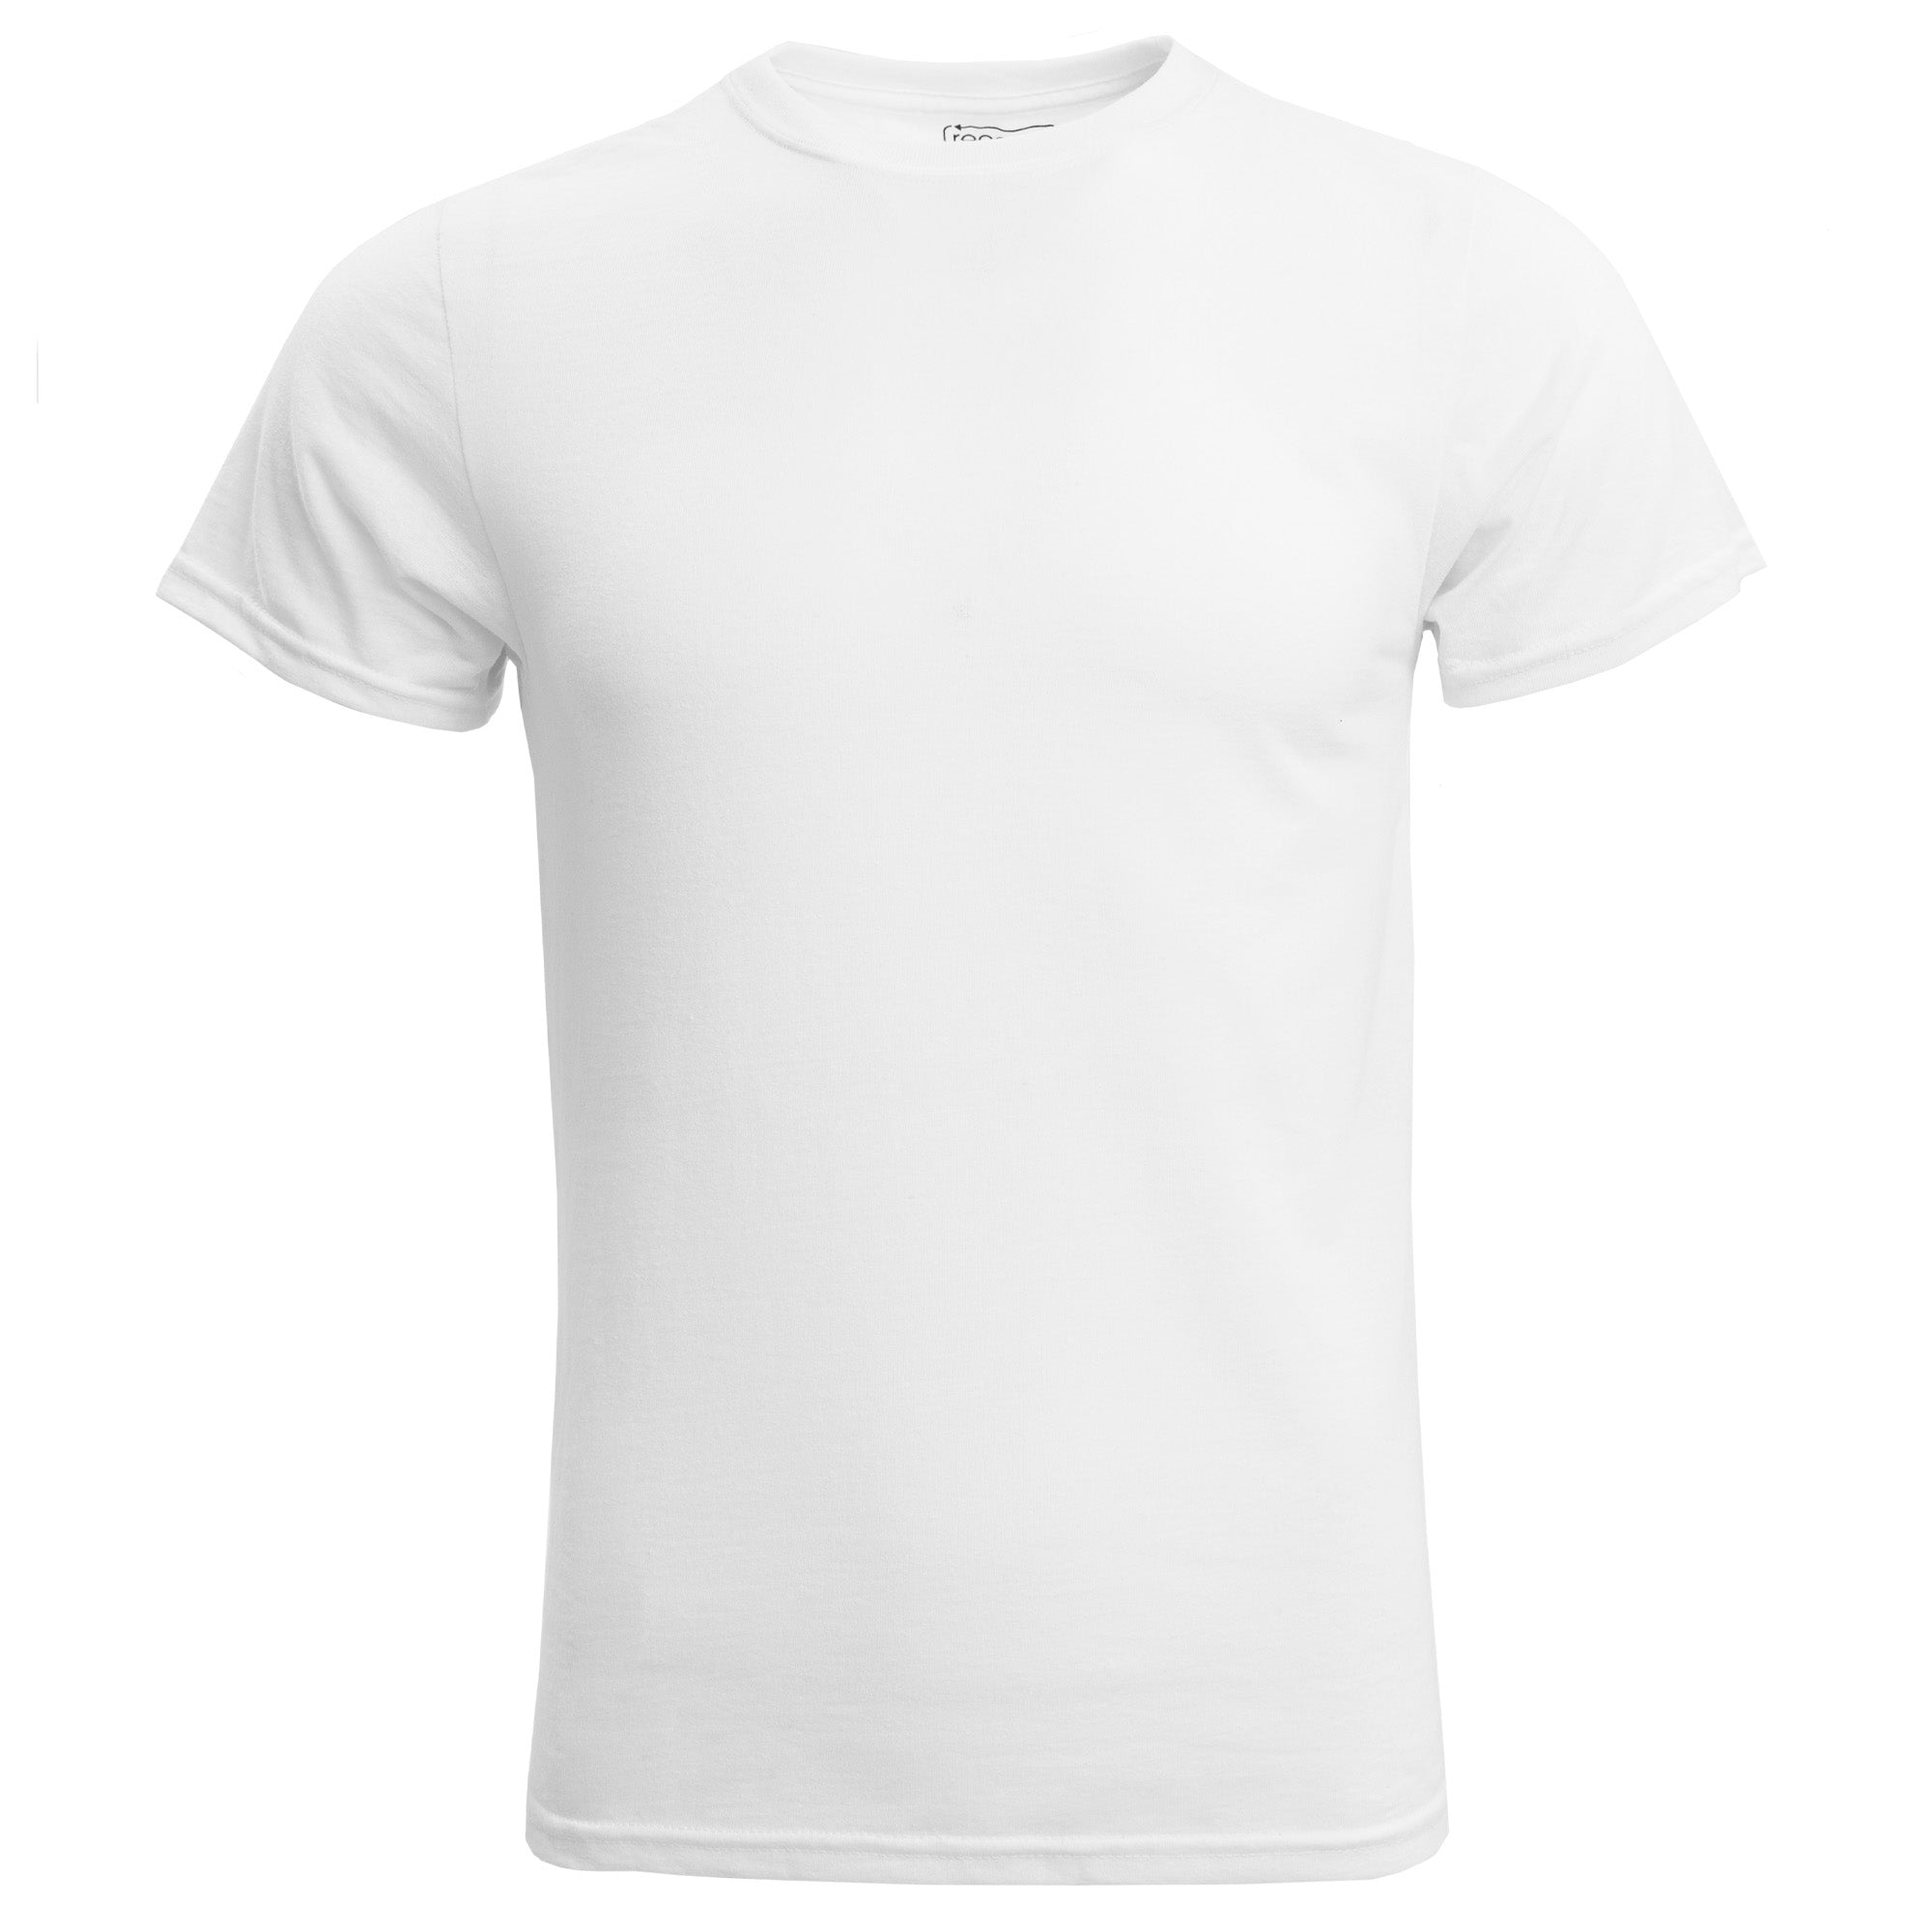 Eco-Friendly T-Shirt | Sustainable Apparel | Men's Shirts | Recover ...